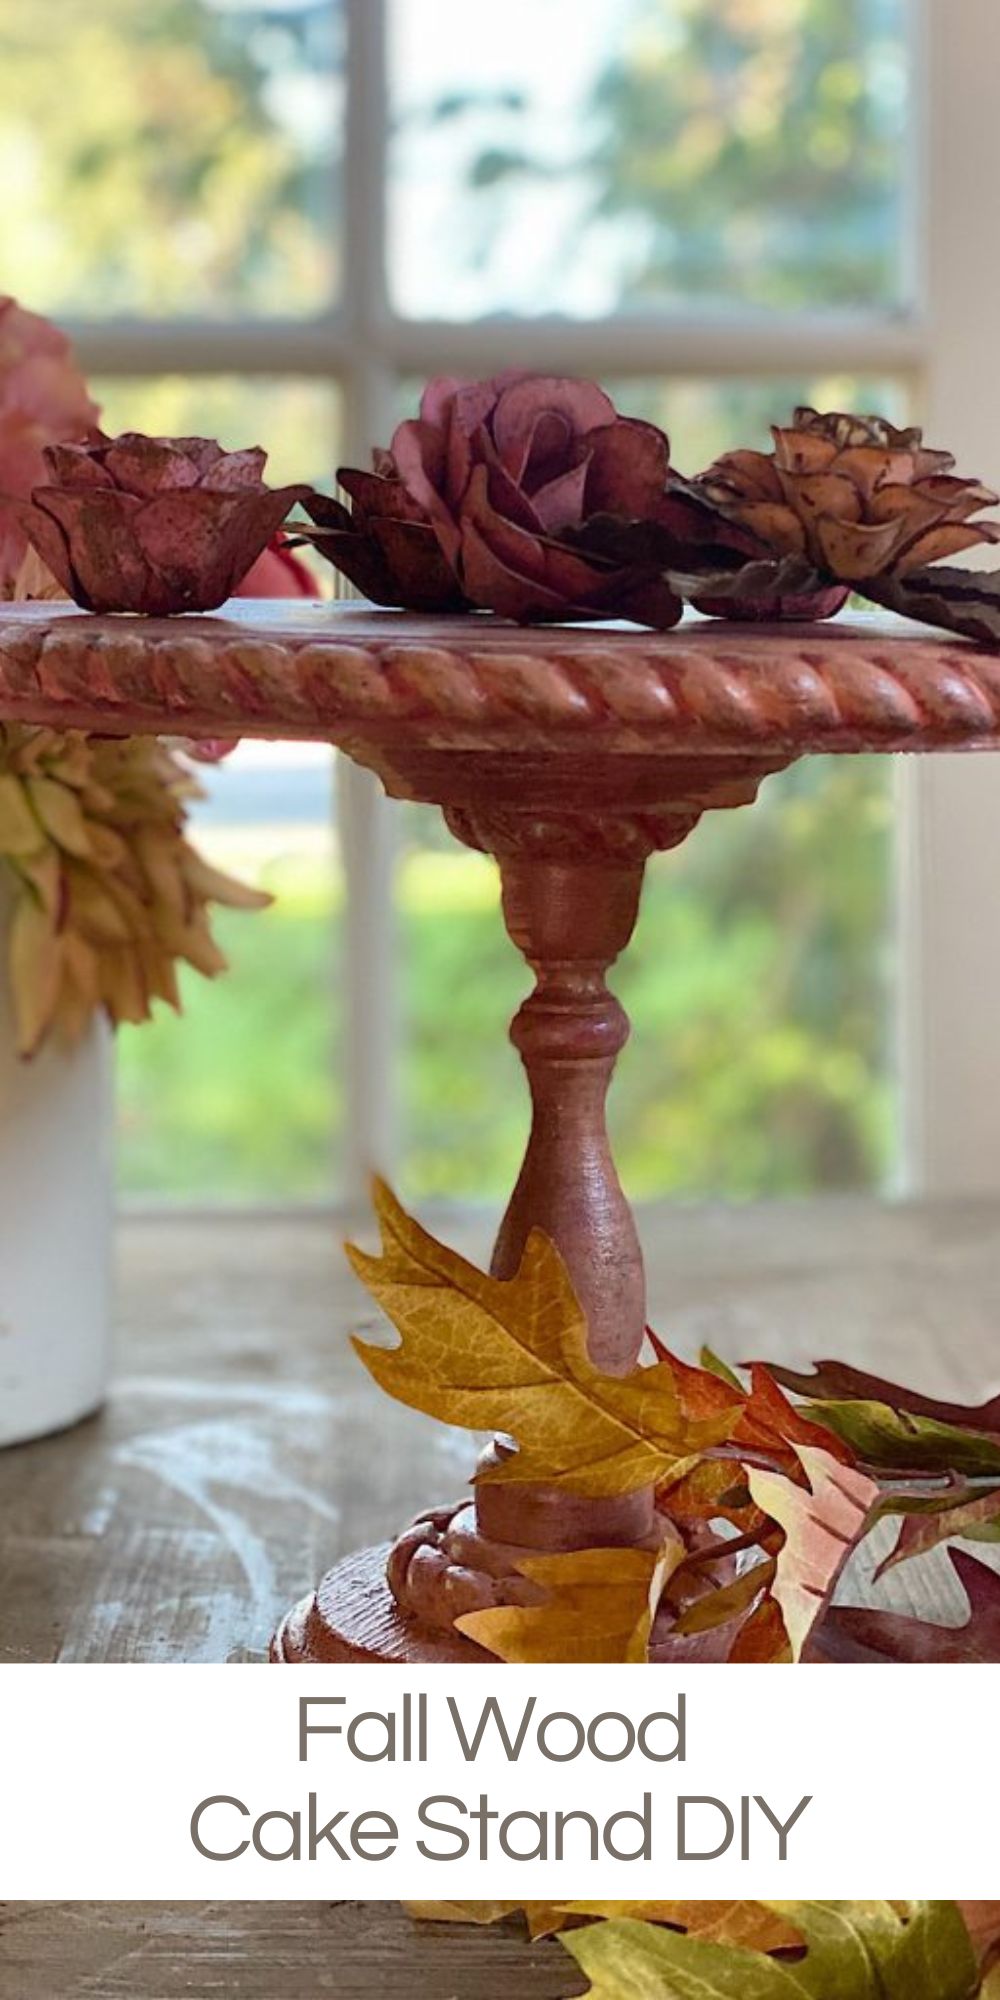 I have been busy making crafts for fall and I love this DIY - a fall wood cake stand. I chose to use fall colors (instead of white) and am so happy I did!